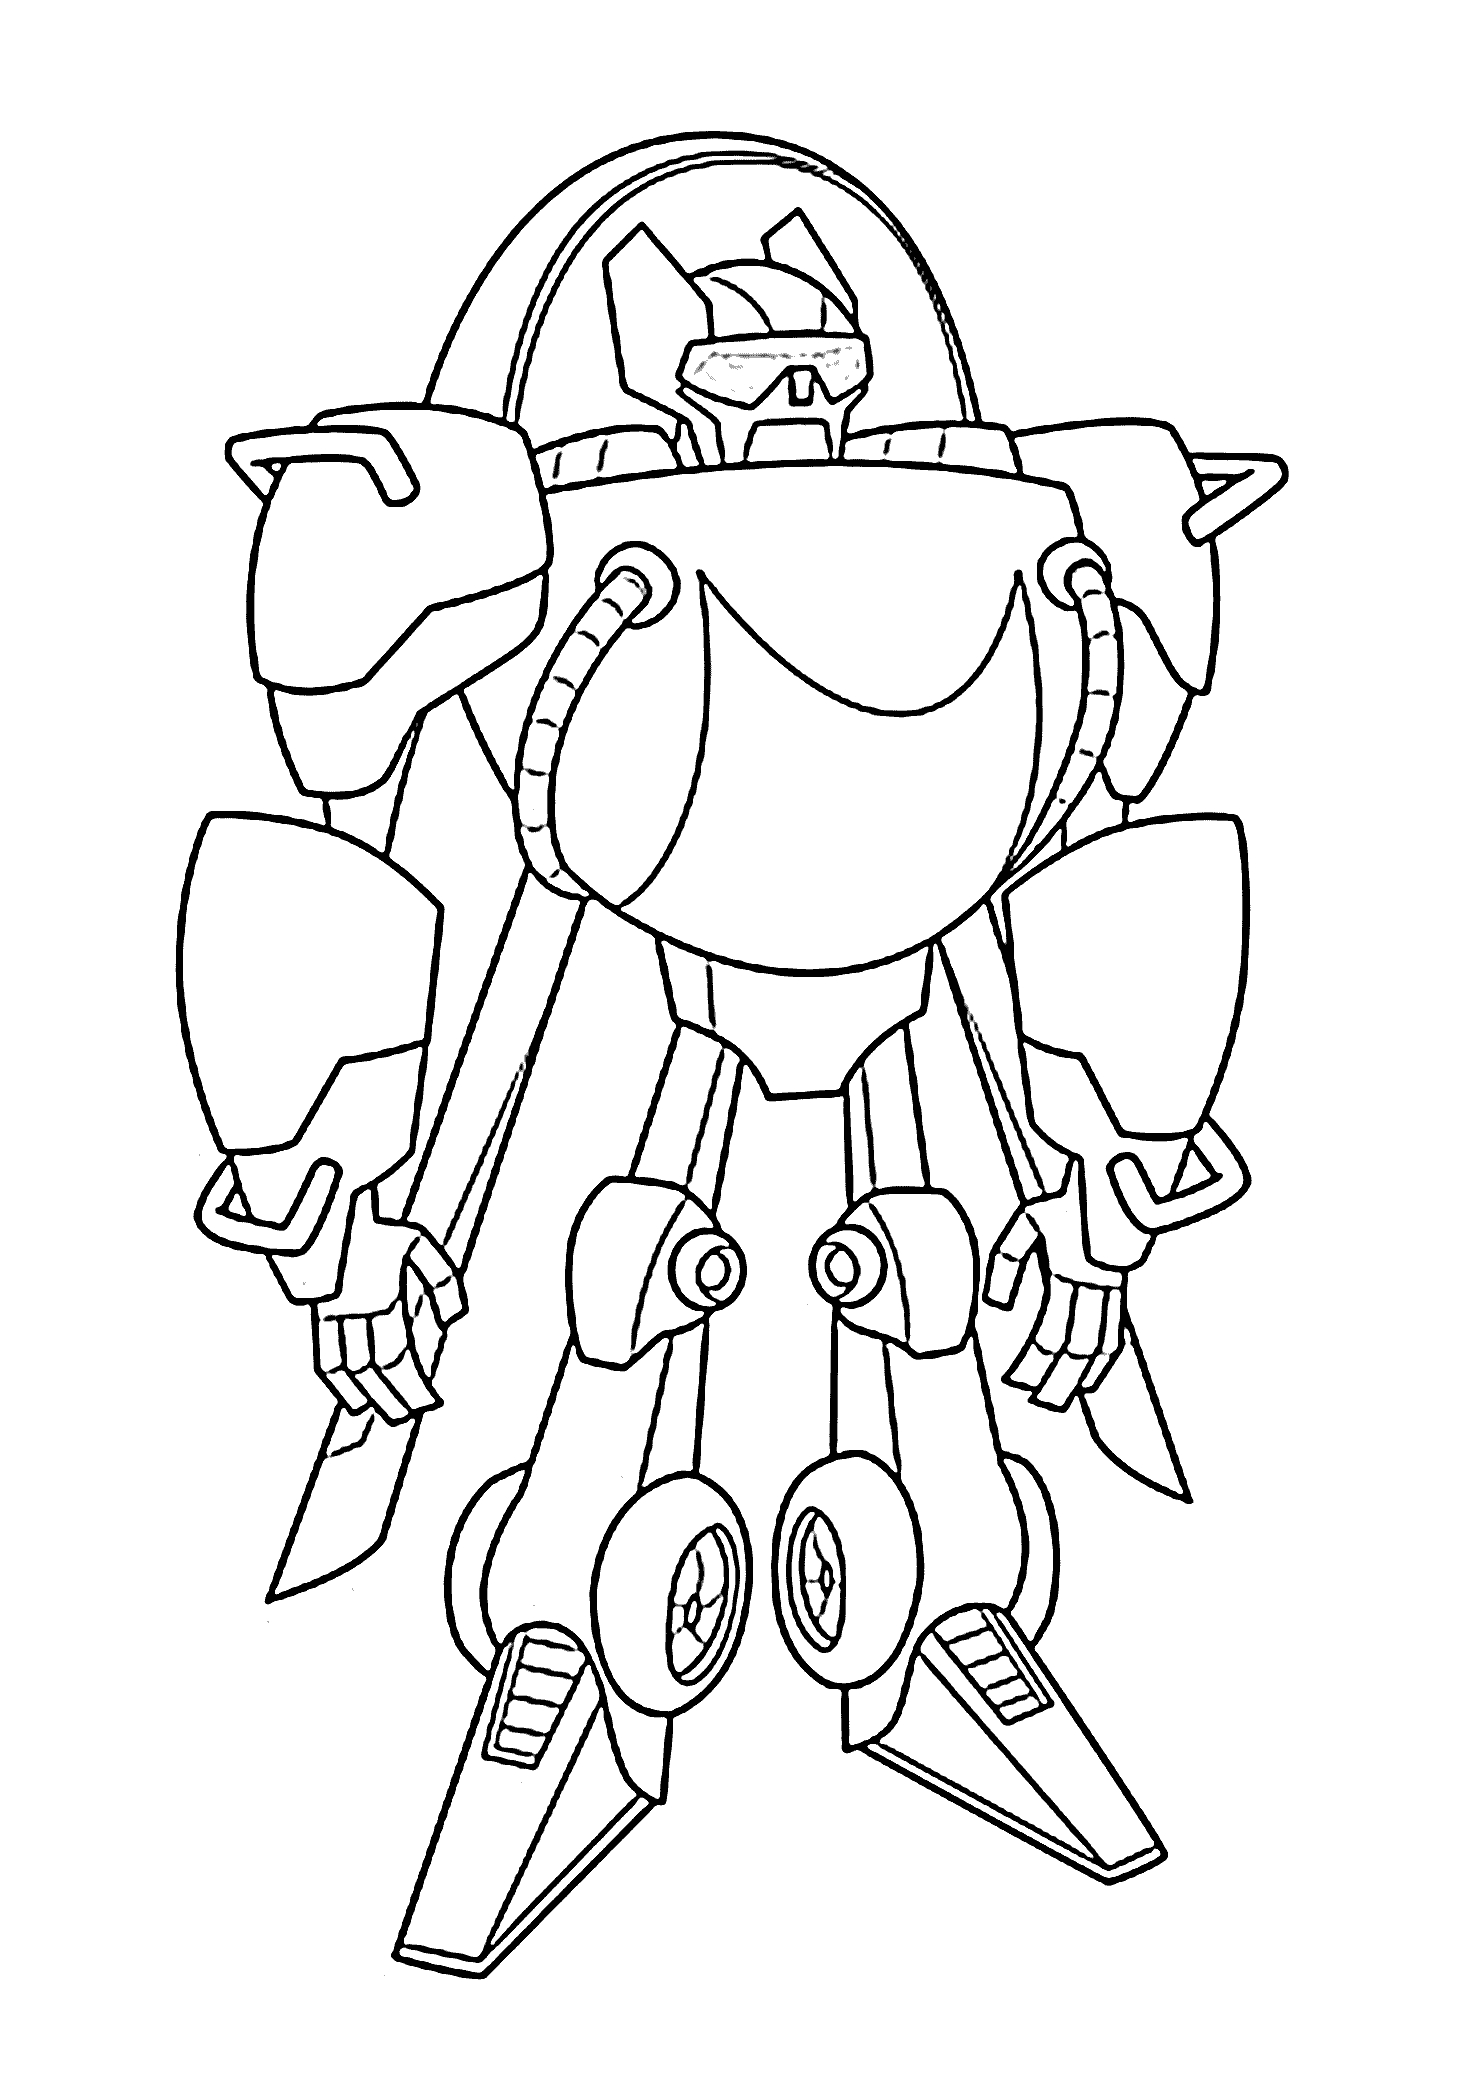 Morocco Coloring Pages 20 Printable Transformers Rescue Bots Coloring Pages